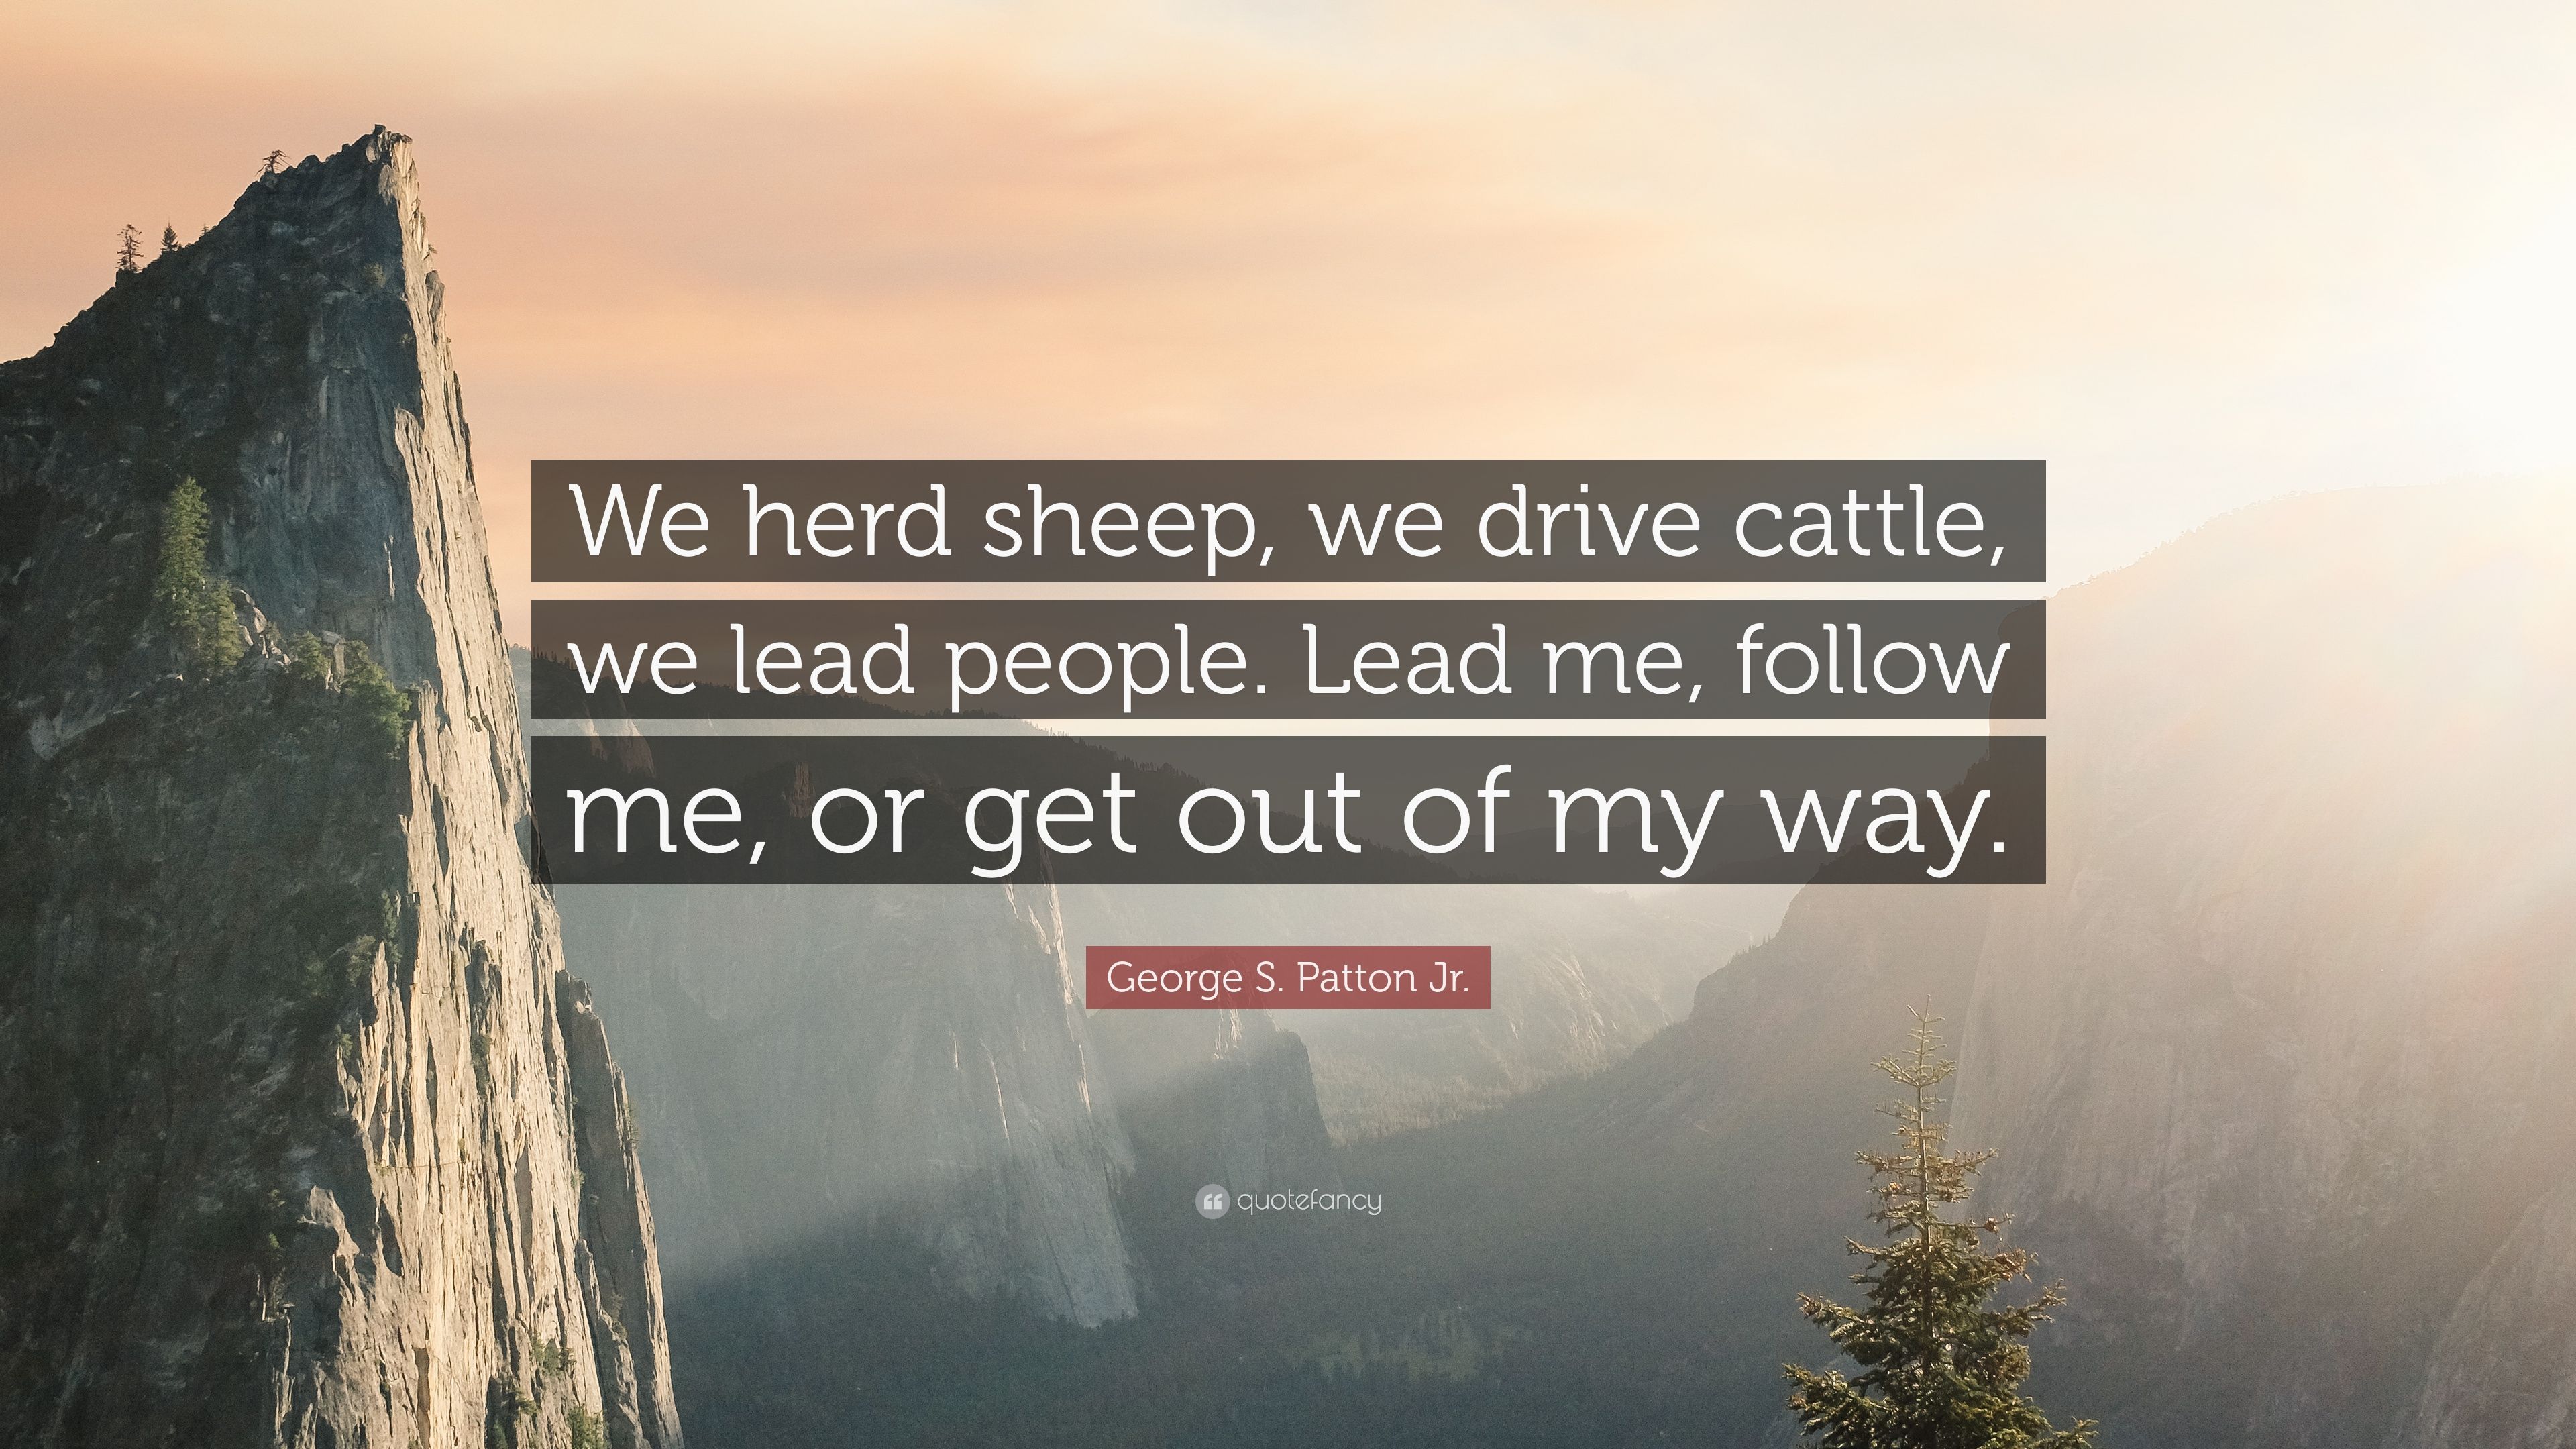 George S. Patton Jr. Quote: “We herd sheep, we drive cattle, we lead ...